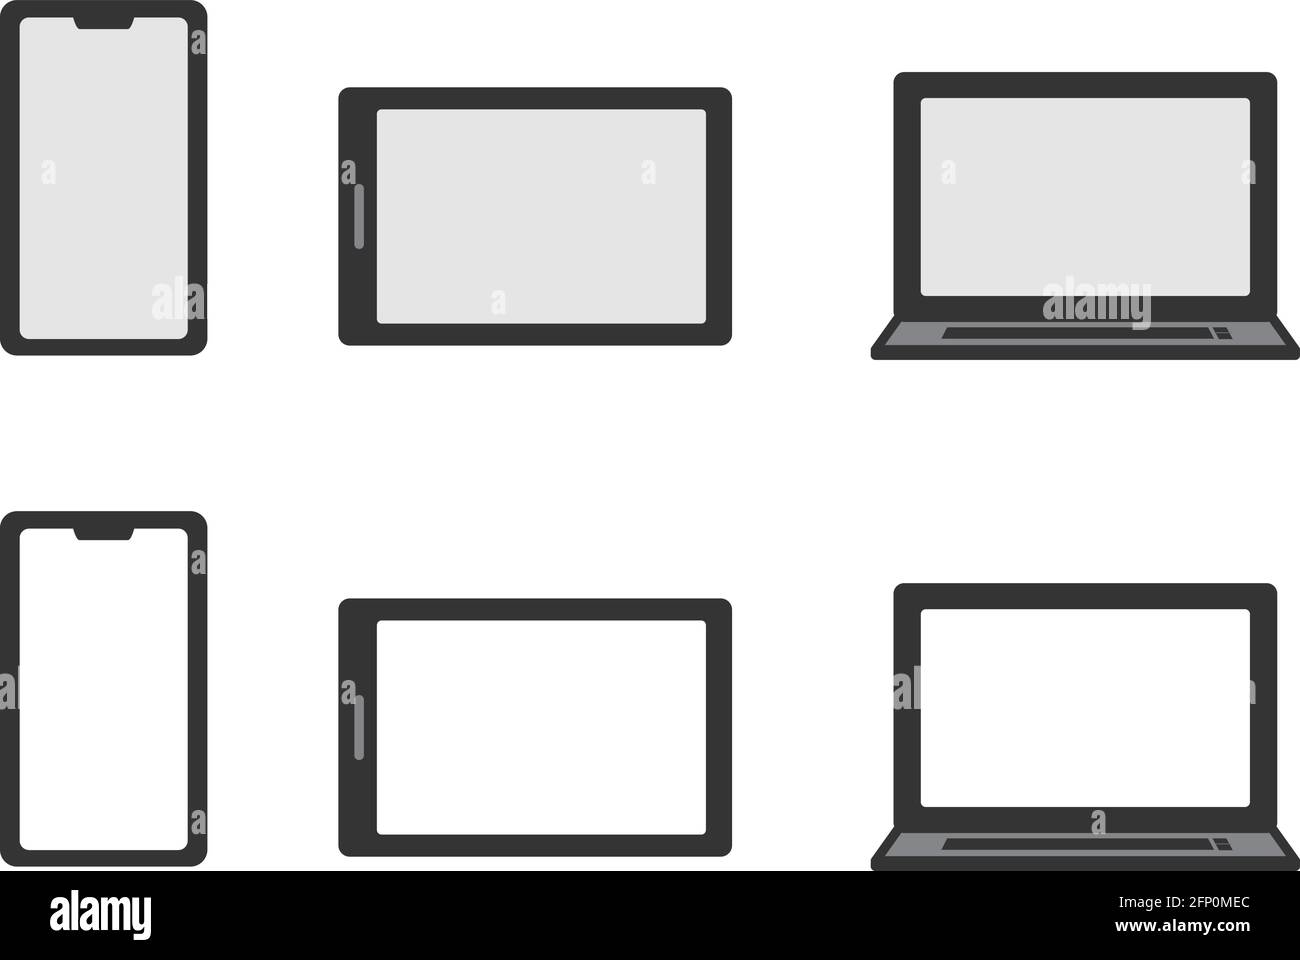 Set of laptop, tablet, and smartphone. Vector illustration isolated on white background. Stock Vector